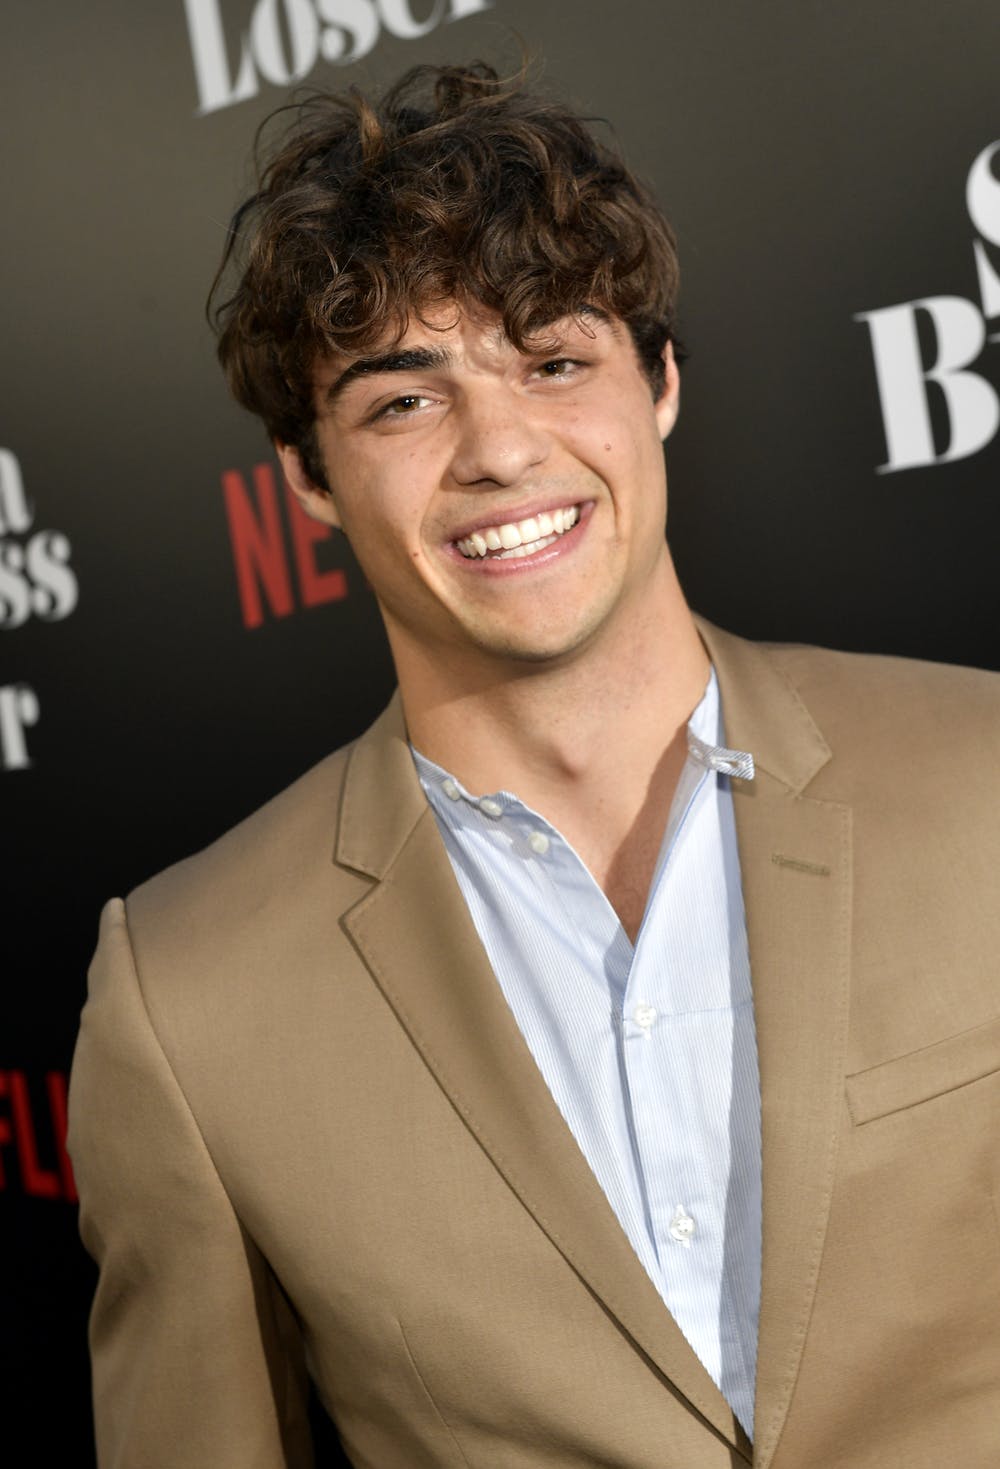 Noah Centineo Talks About the Possibility of a 'To All the Boys I've